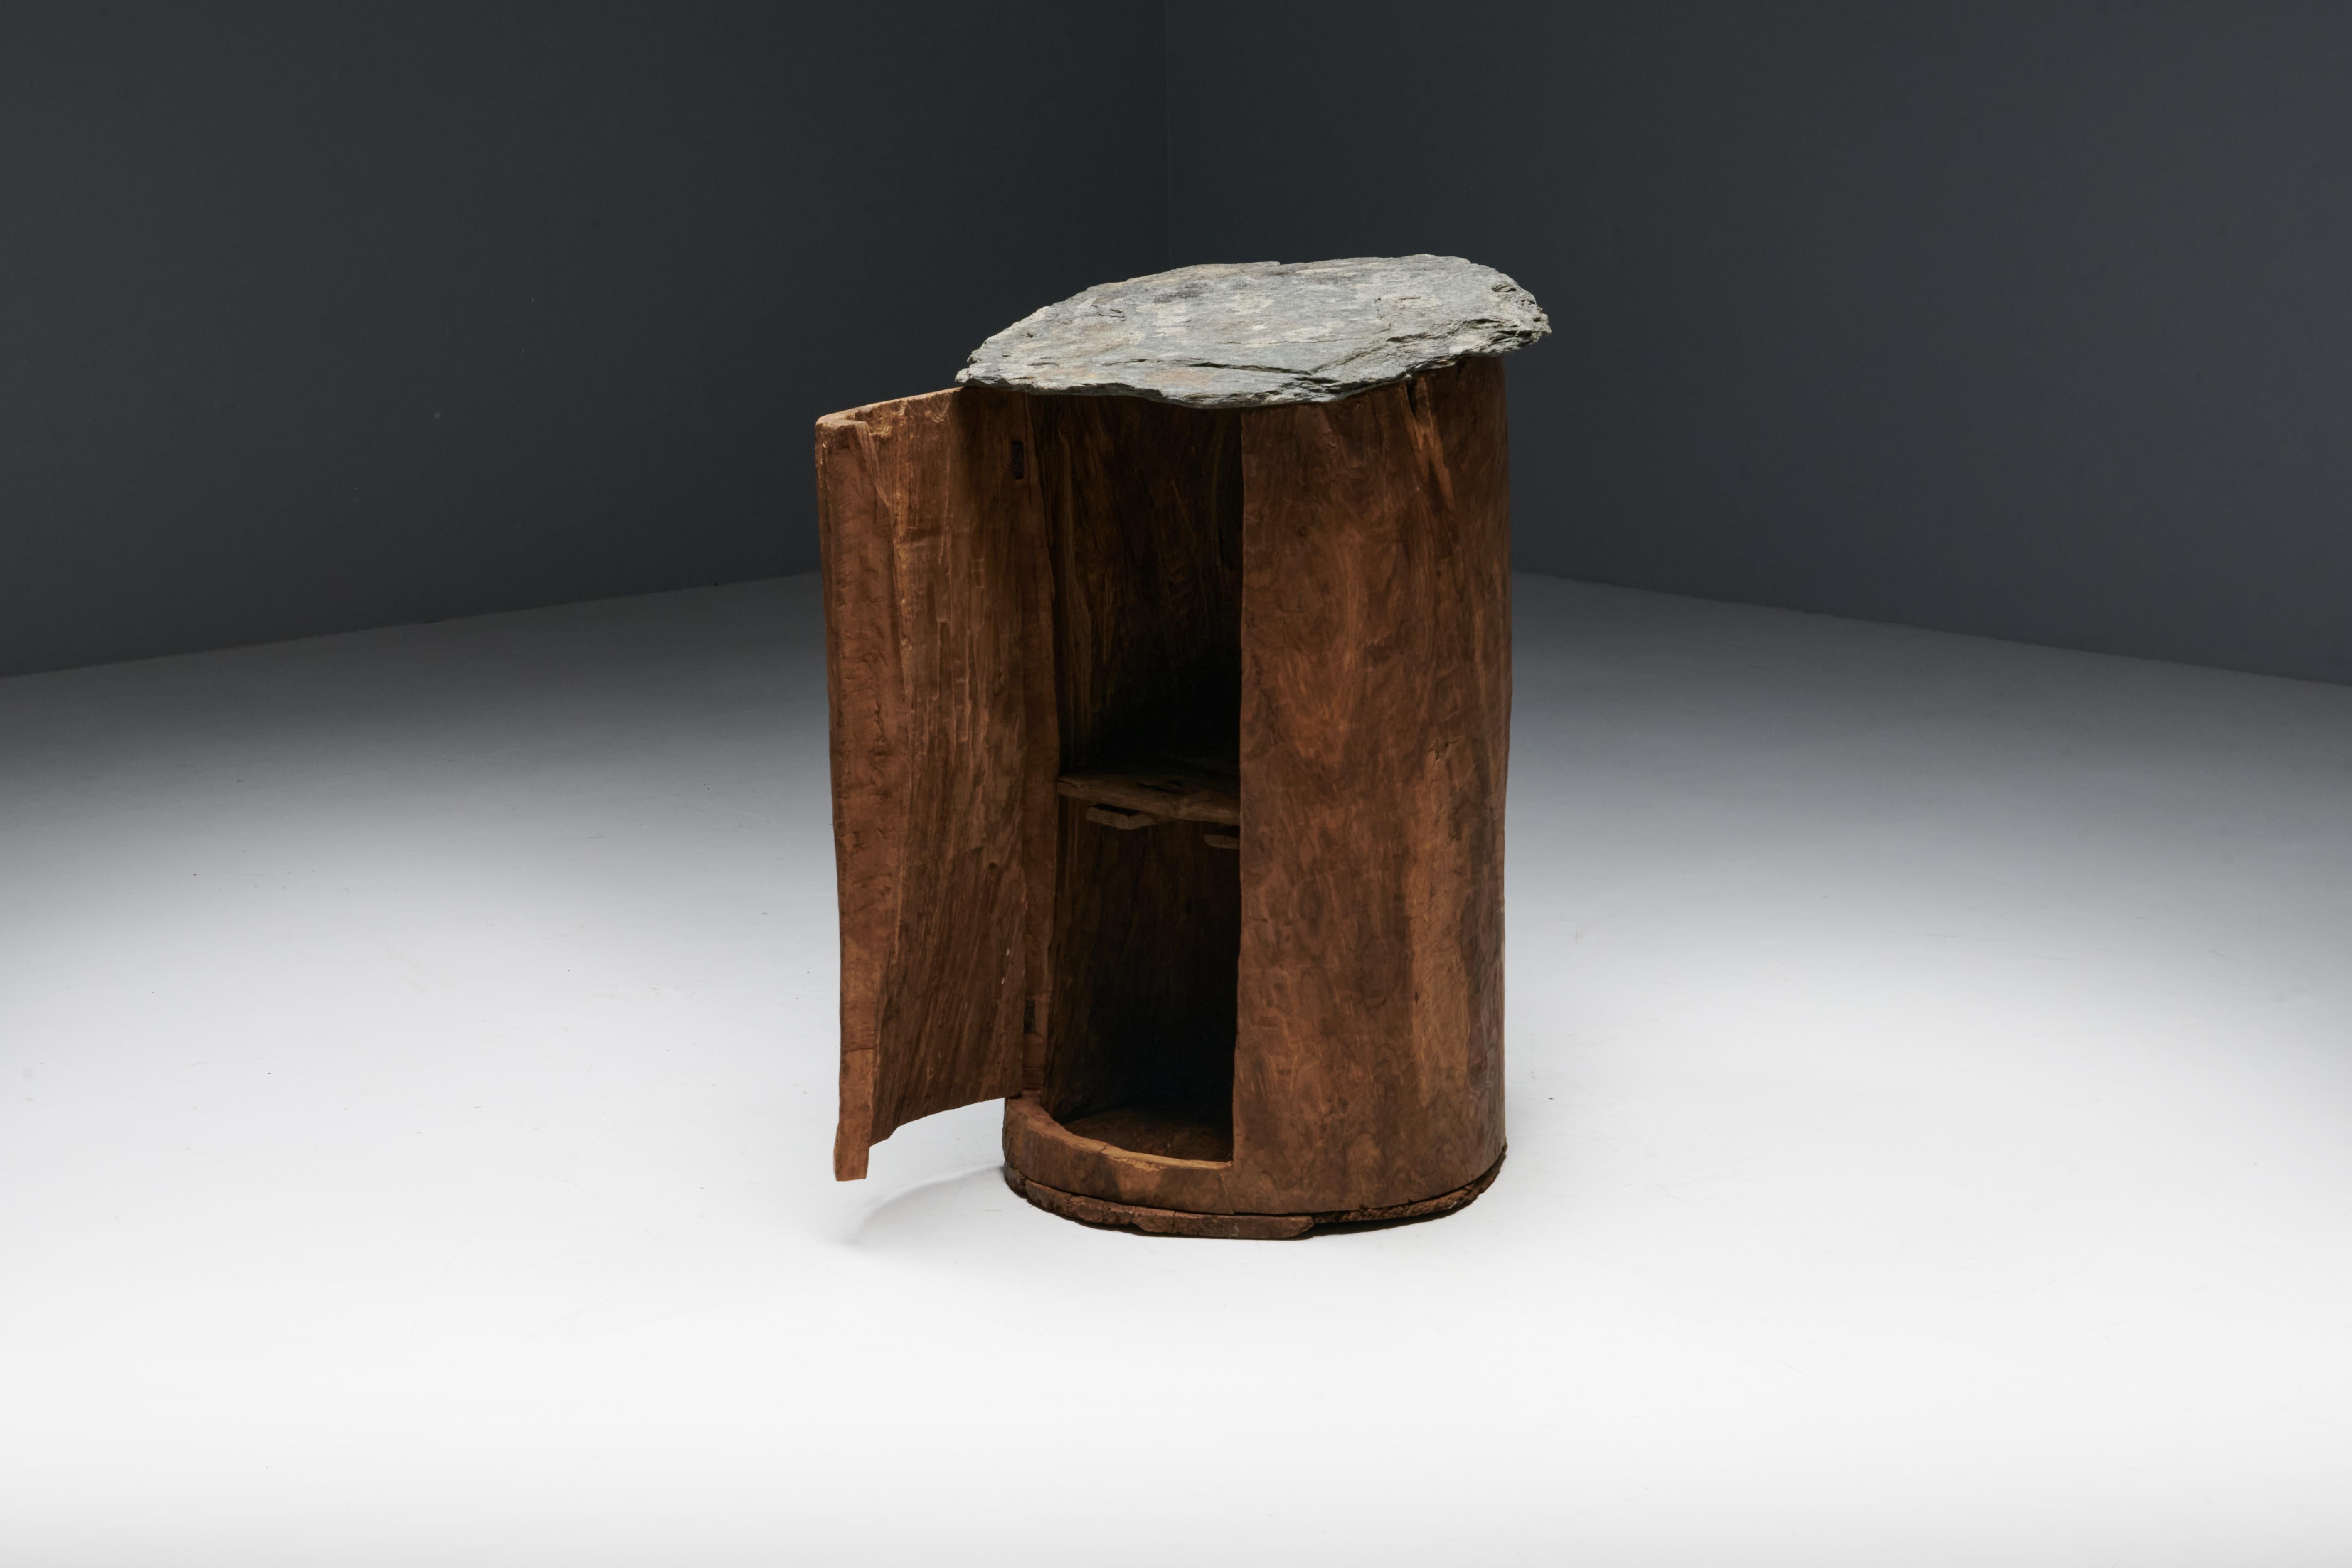 This unique rustic folk art cabinet is handcrafted from a solid tree trunk and finished with exquisite slate, seamlessly blending natural beauty with functional design. Harking back to a bygone era when these creations were known as 